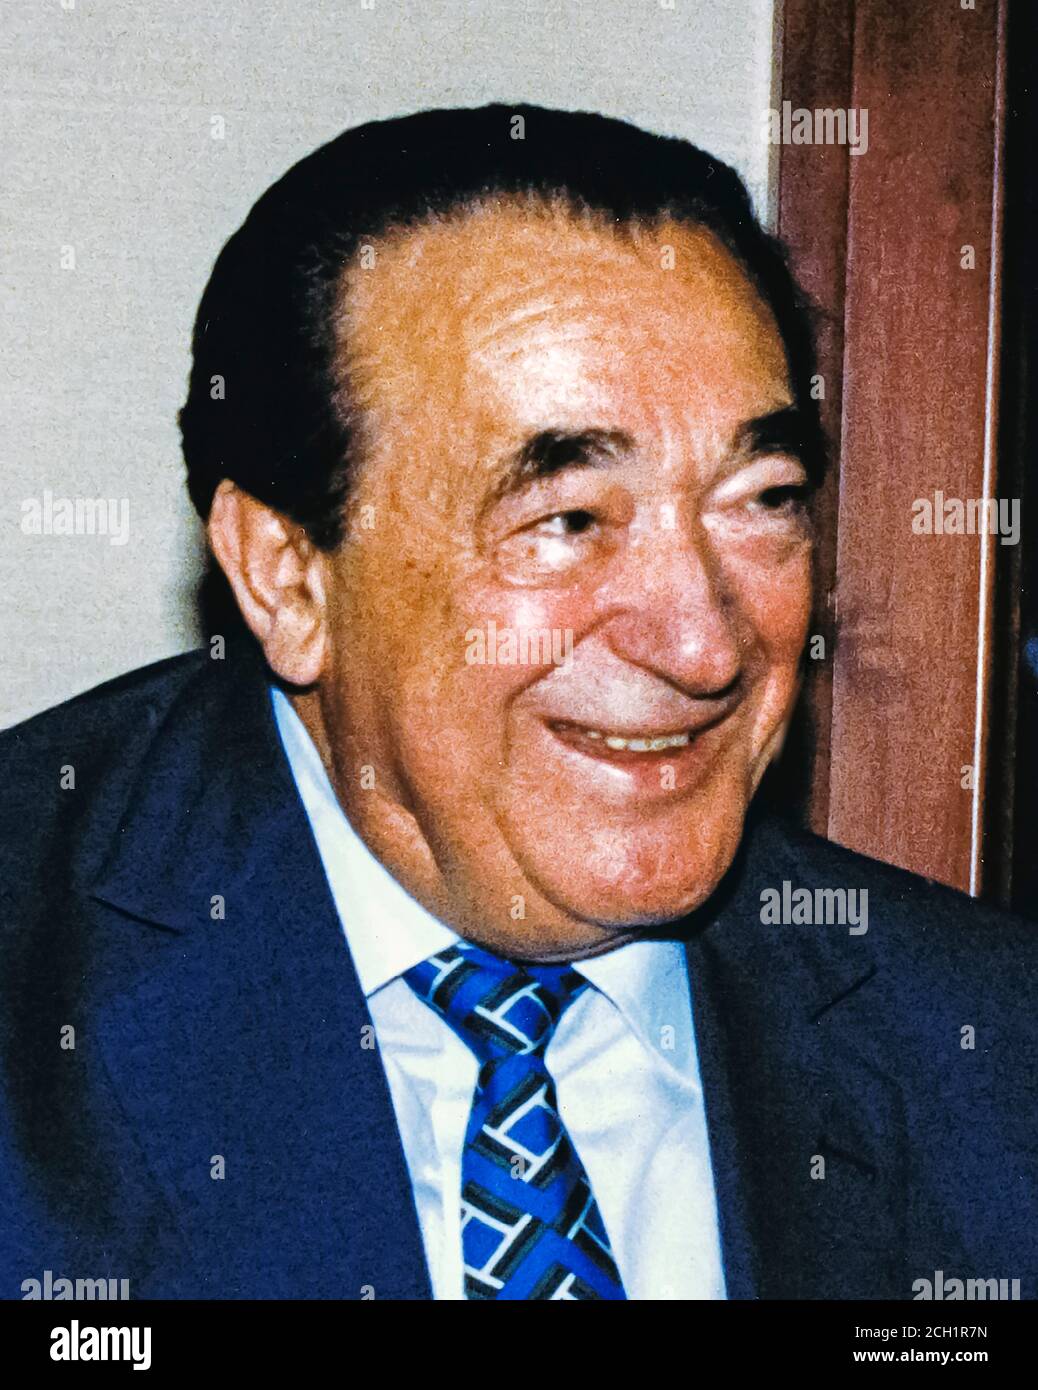 In this file photo from September 25, 1990, disgraced publisher Robert Maxwell meets South African Ambassador to the United States Piet G.J. Koornhof in Washington, DC on September 25, 1990. The New York Post is reporting today that Maxwell, through his daughter Ghislaine Maxwell, may have been the source the huge fortune amassed by alleged pedophile Jeffrey Epstein, who hanged himself in his Manhattan lockup last August.Credit: Ron Sachs/CNP | usage worldwide Stock Photo